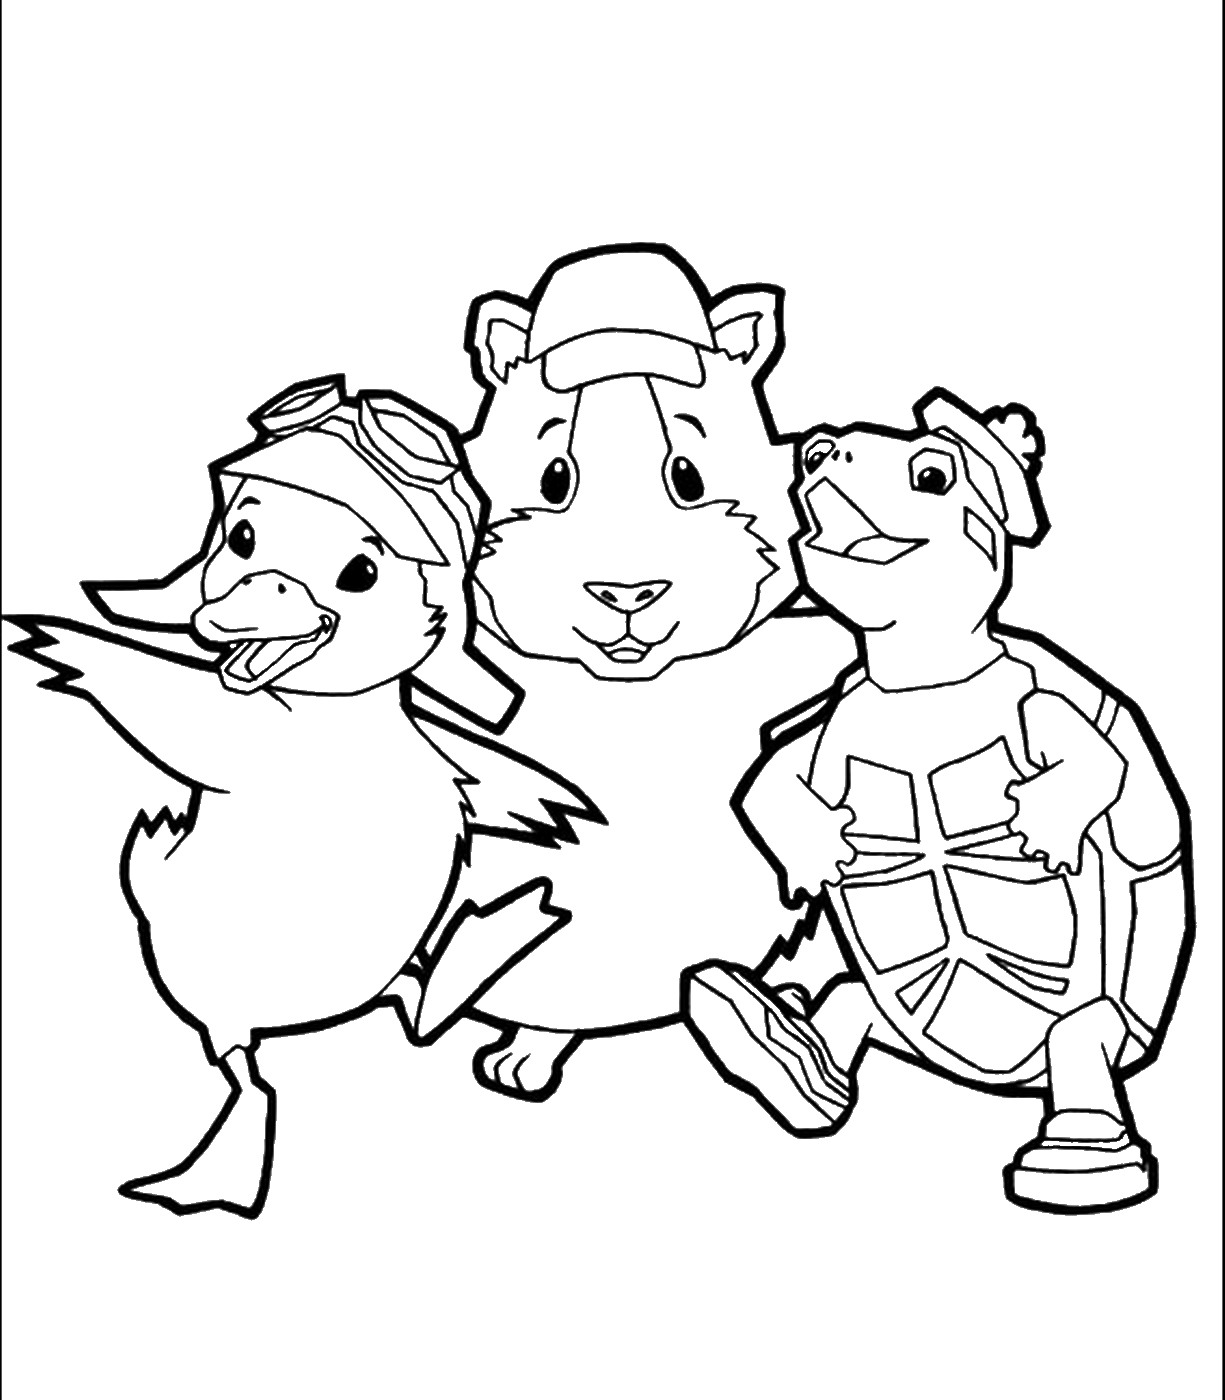  Wonder Pets Coloring Pages To Print 6